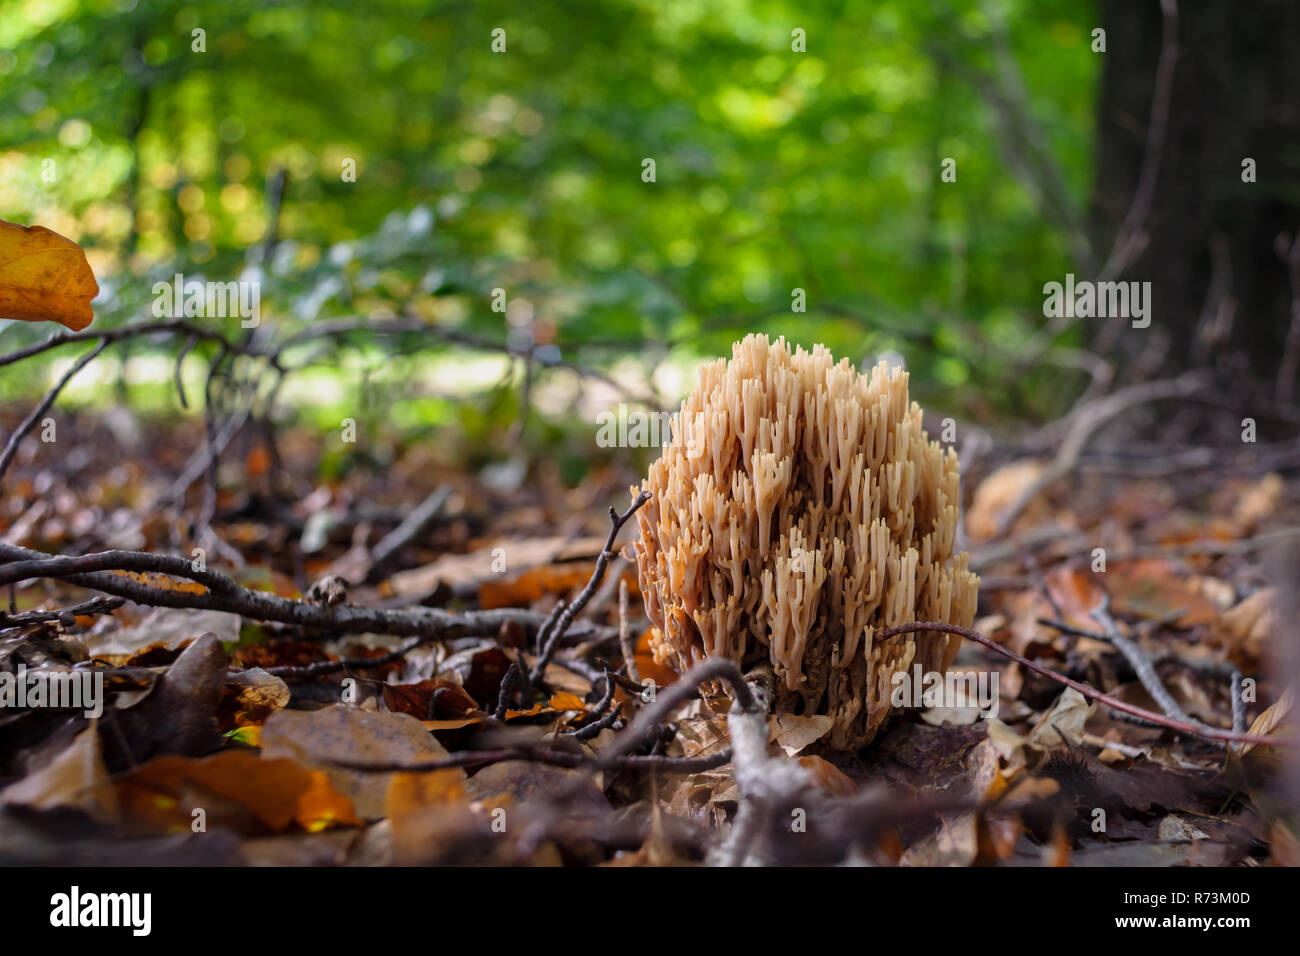 Very rare mushroom in the forest between autumn leaves. Candlestick fungus, Xylaria hypoxylon Stock Photo